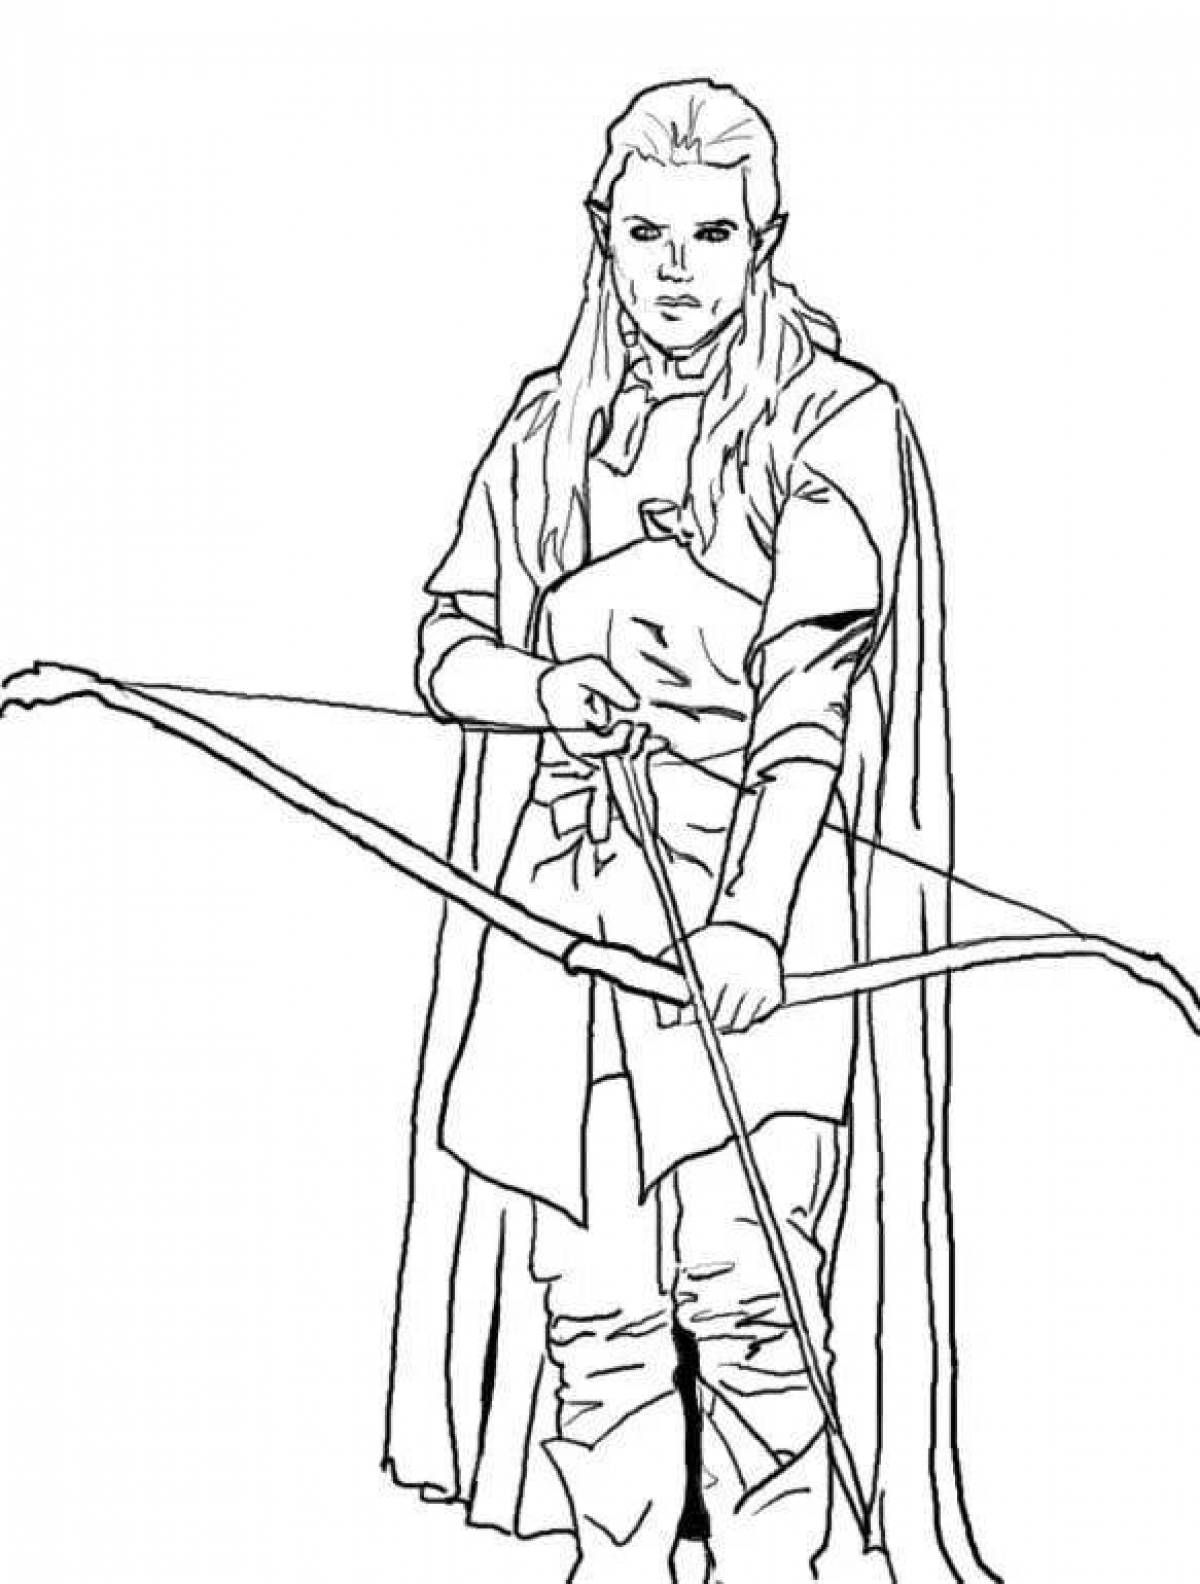 Majestic lord of the rings coloring page